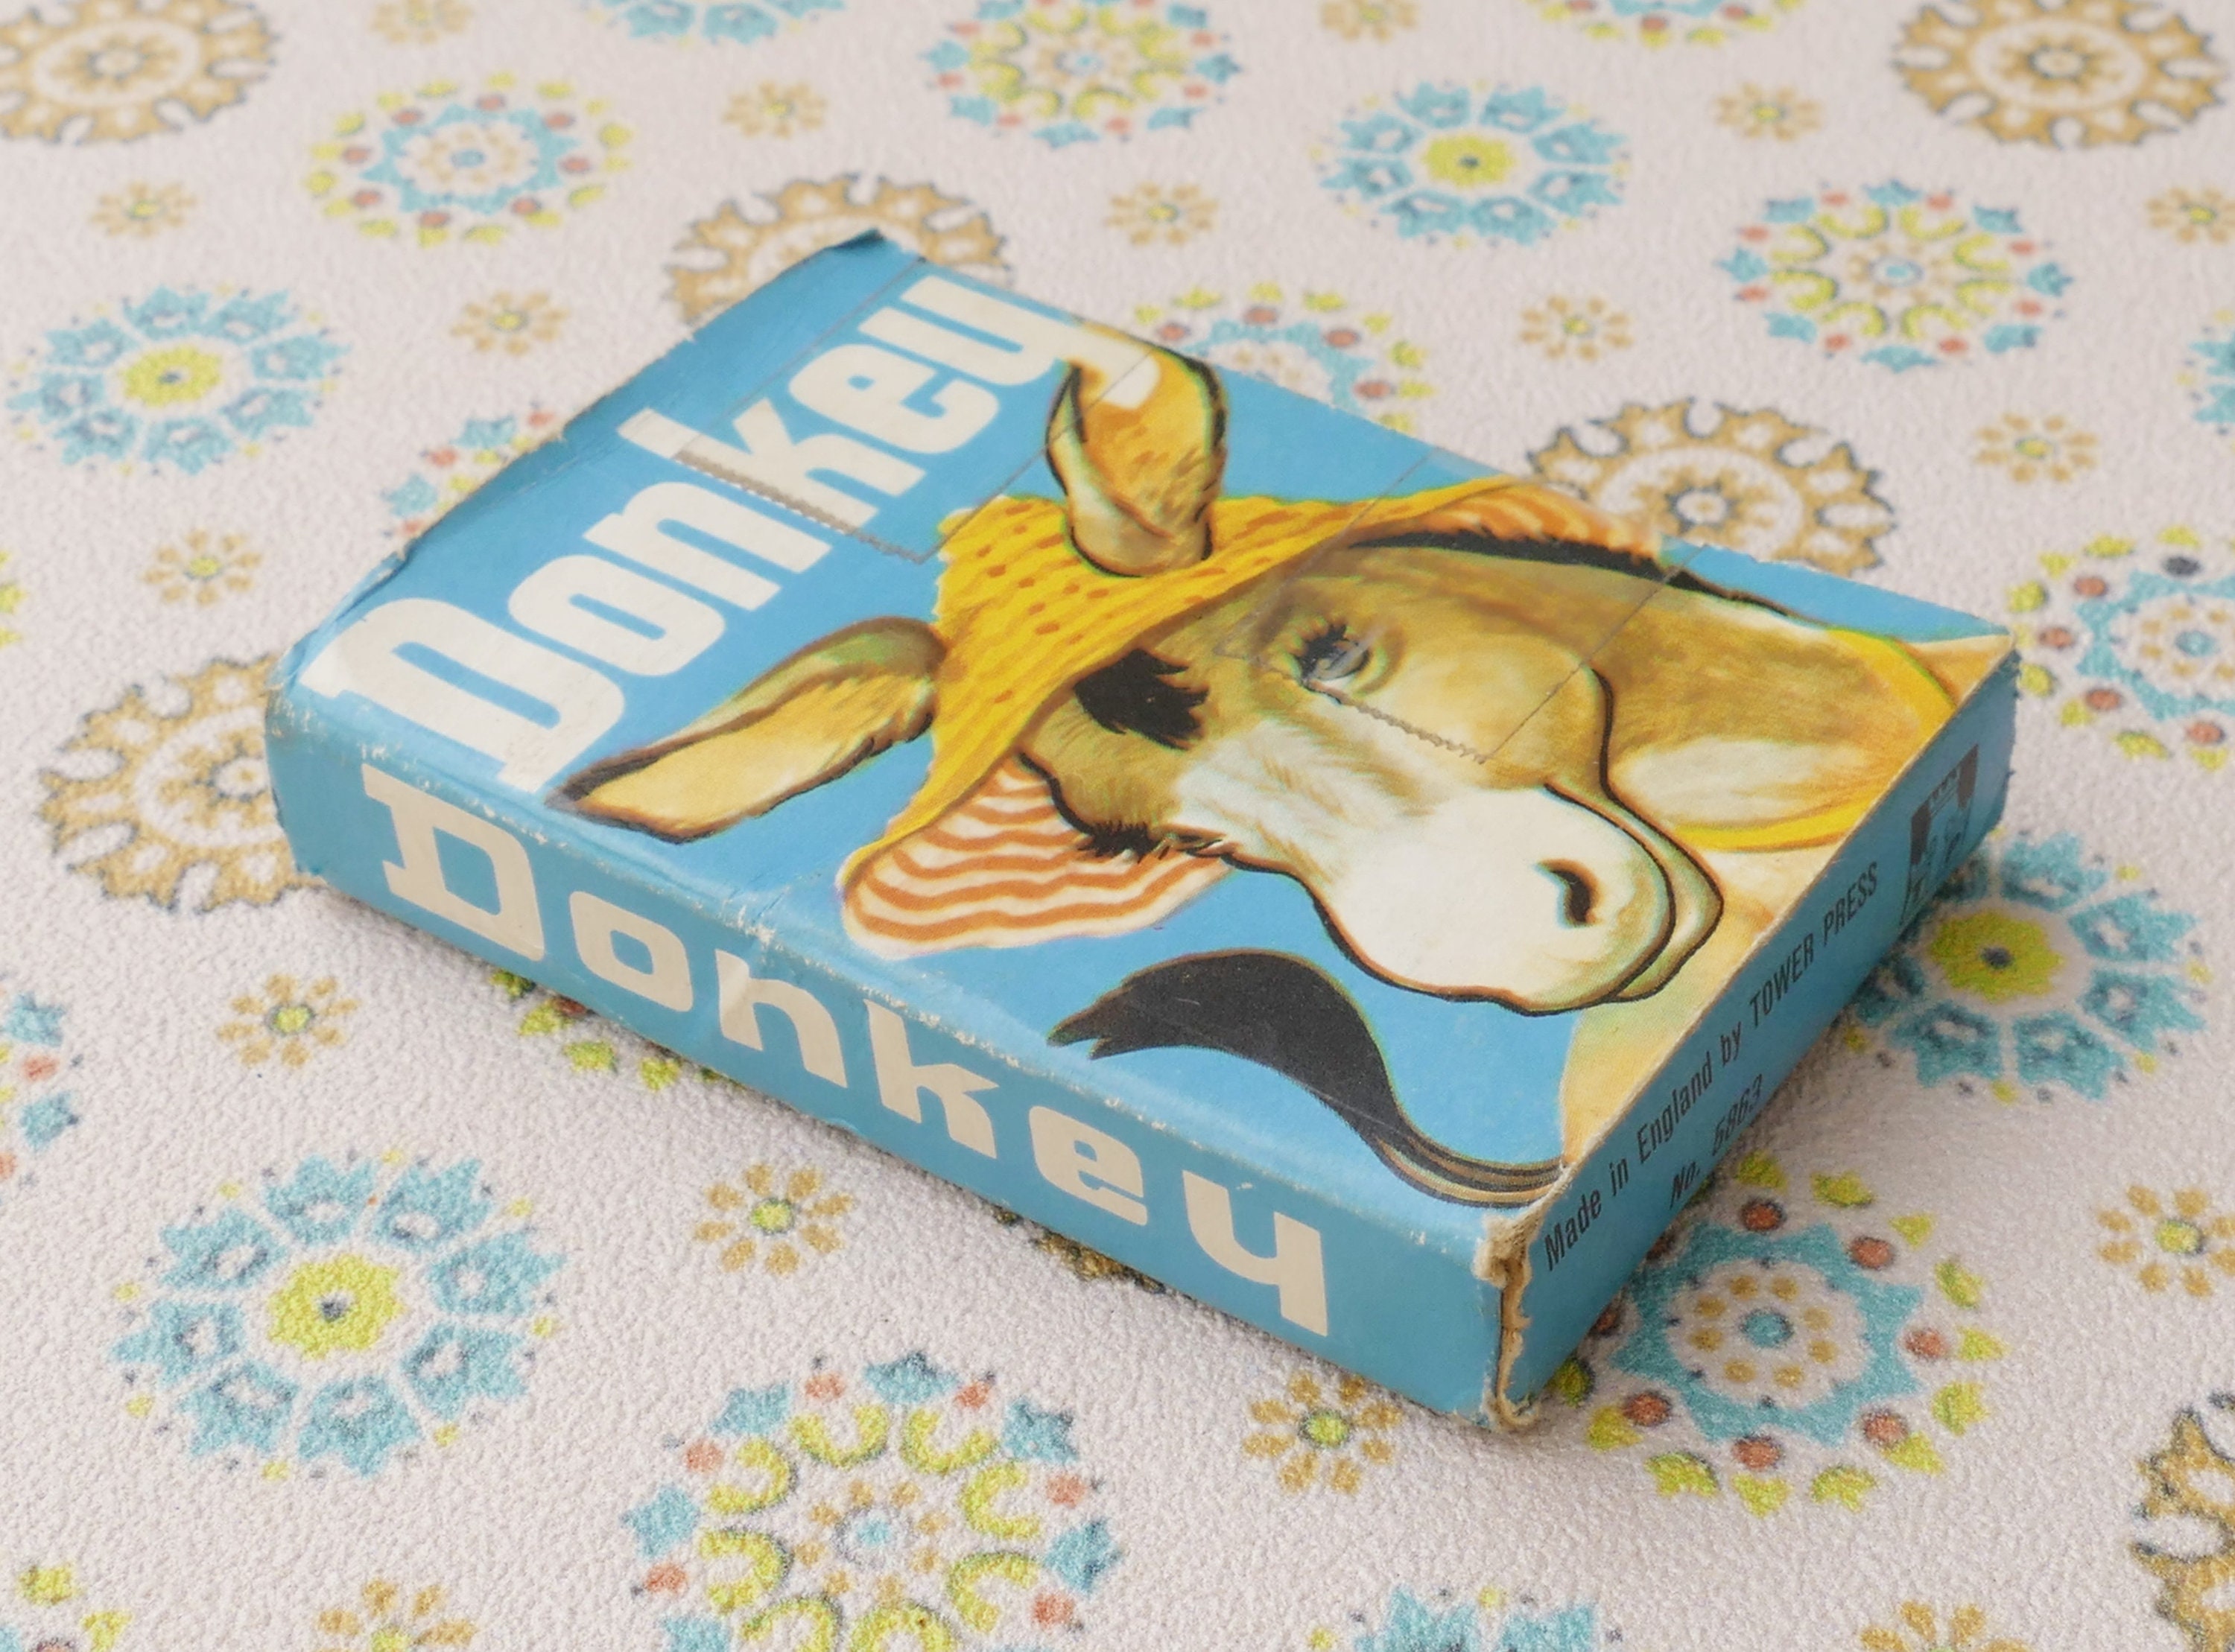 How to play donkey with cards 